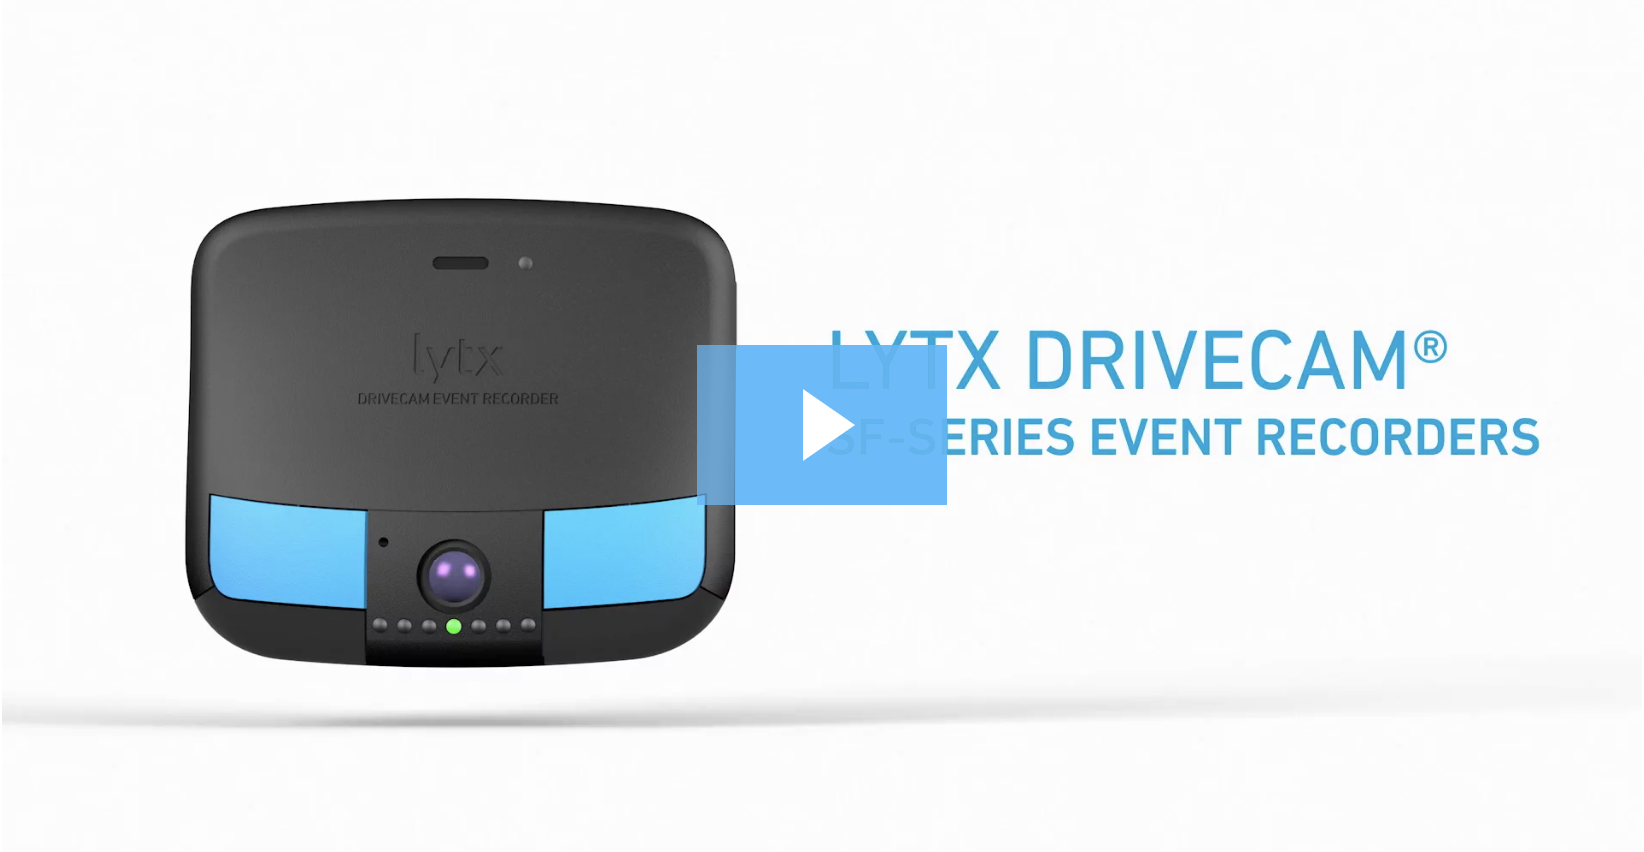 Lytx DriveCam SF-Series Event Recorders